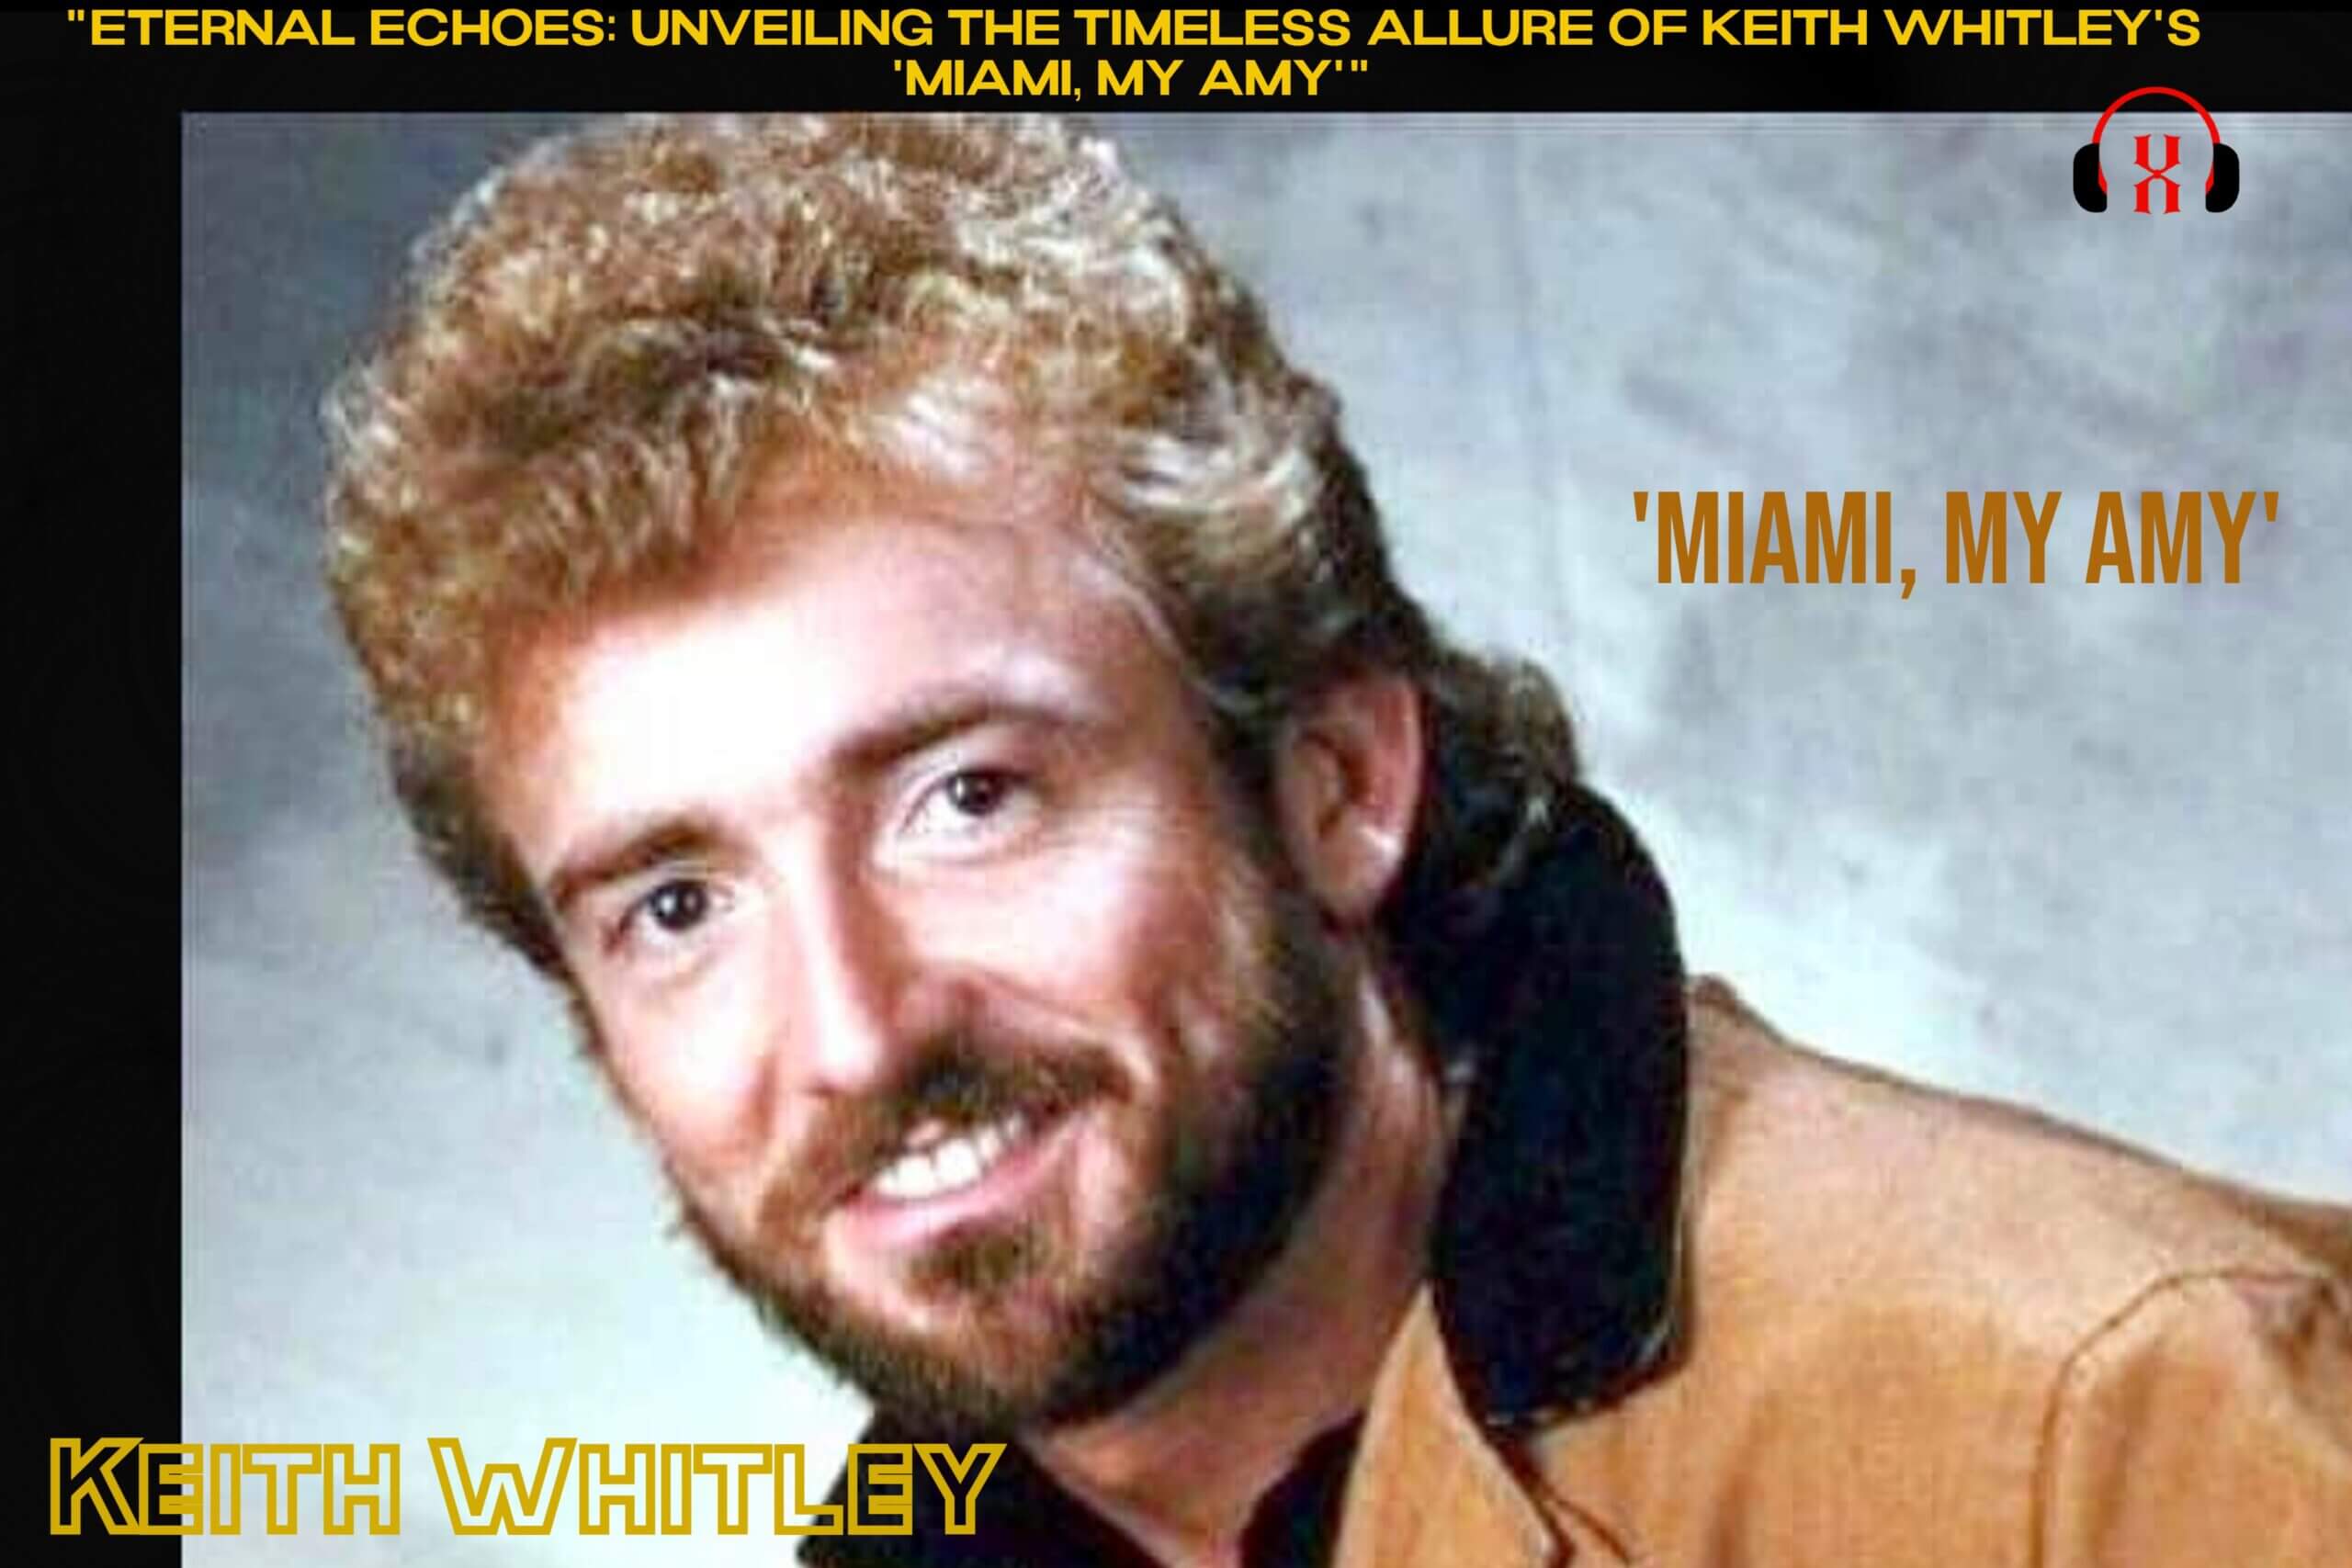 “Eternal Echoes: Unveiling the Timeless Allure of Keith Whitley’s ‘Miami, My Amy'”